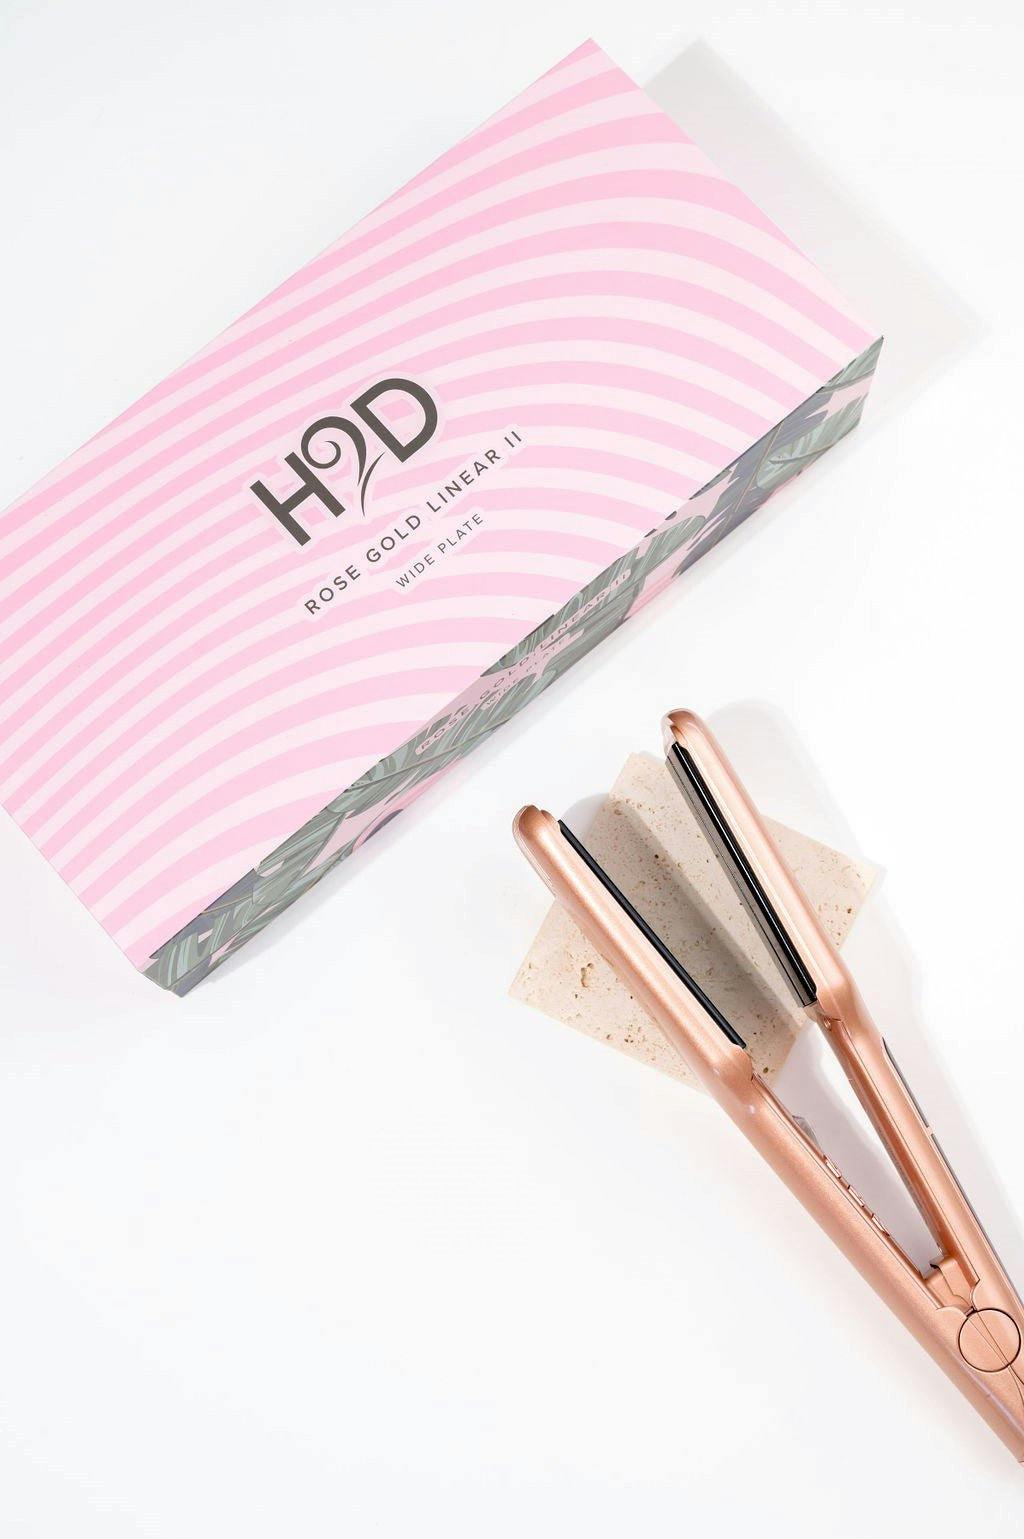 H2D Linear 11 Rose Gold Wide Hair Straightener